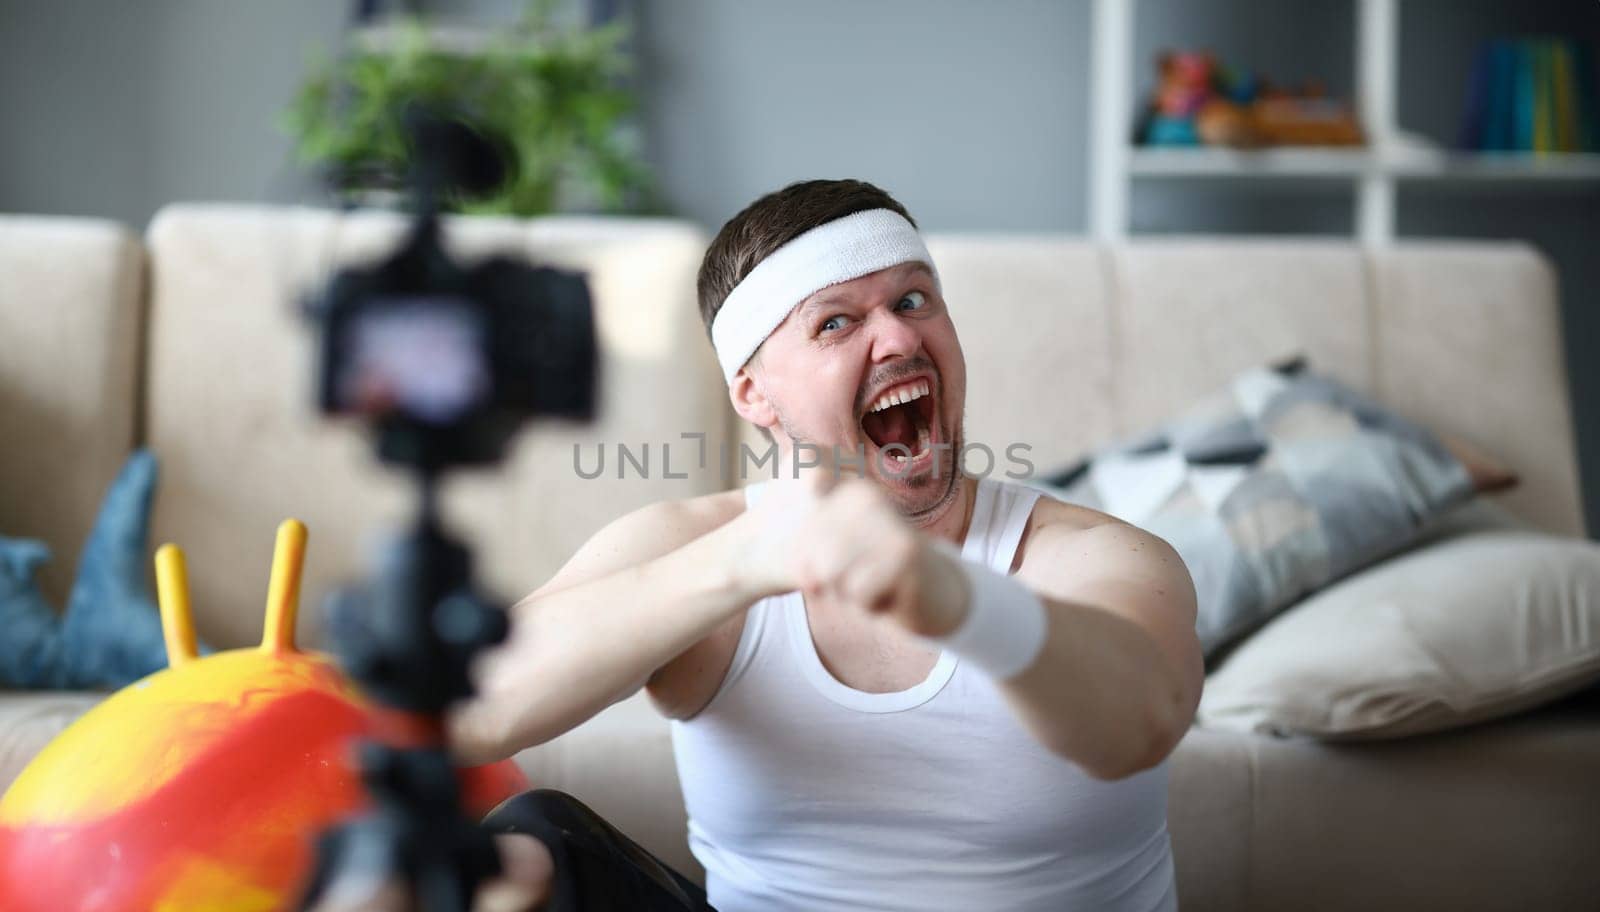 Screaming Vlogger Recording Boxing Video on Camera by kuprevich